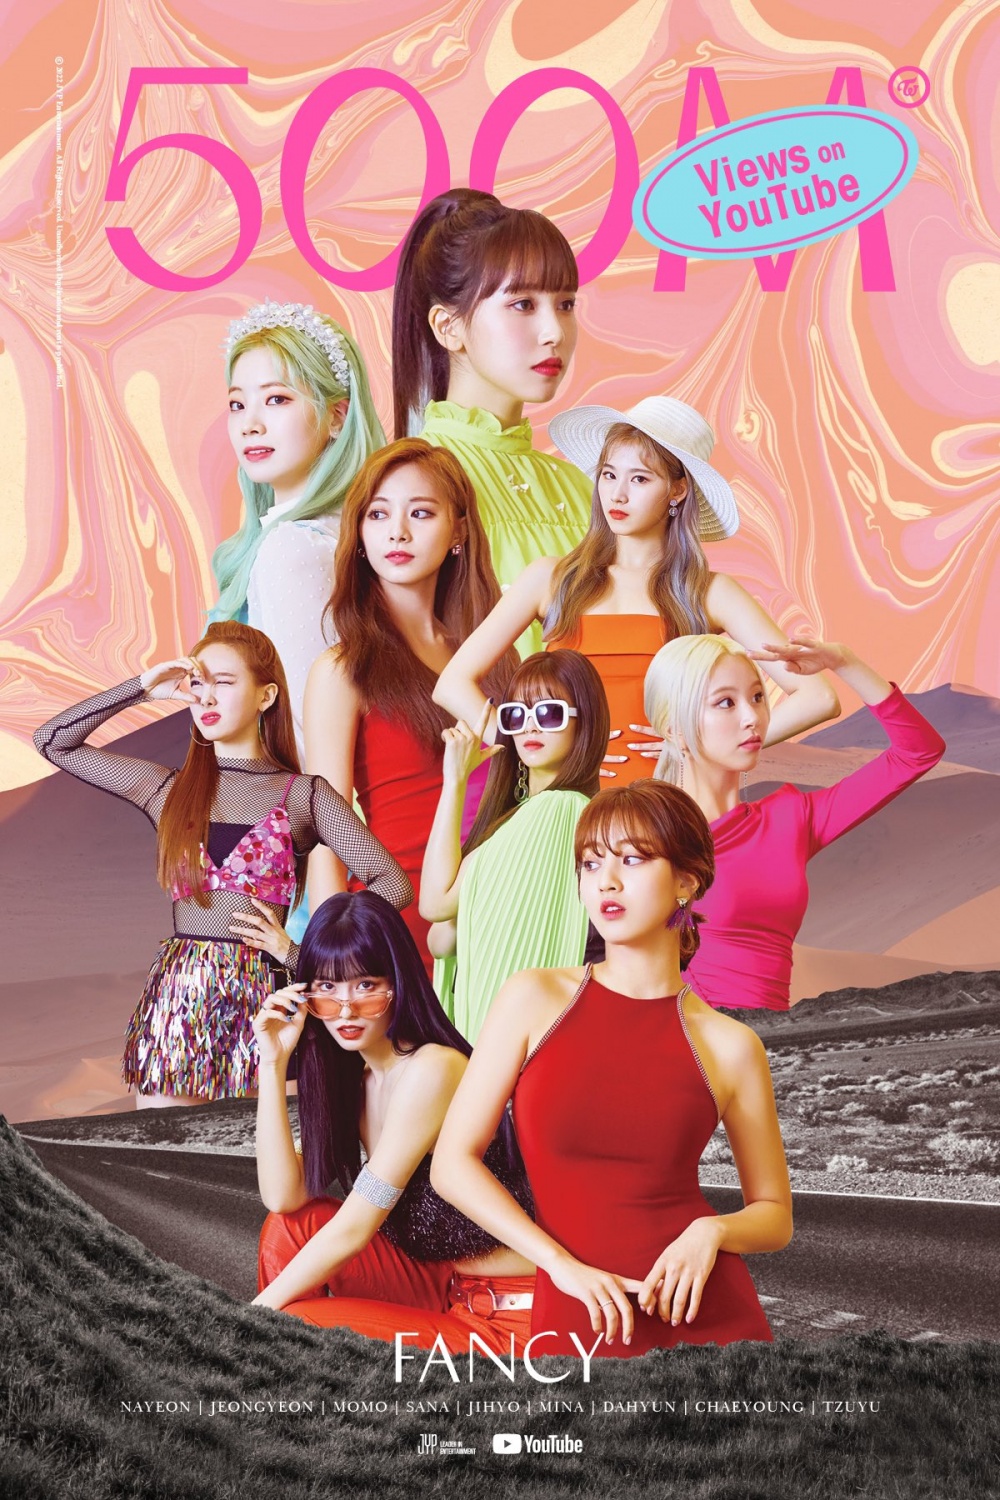 TWICE, US ENCORE additional performances sold out… stadium fill